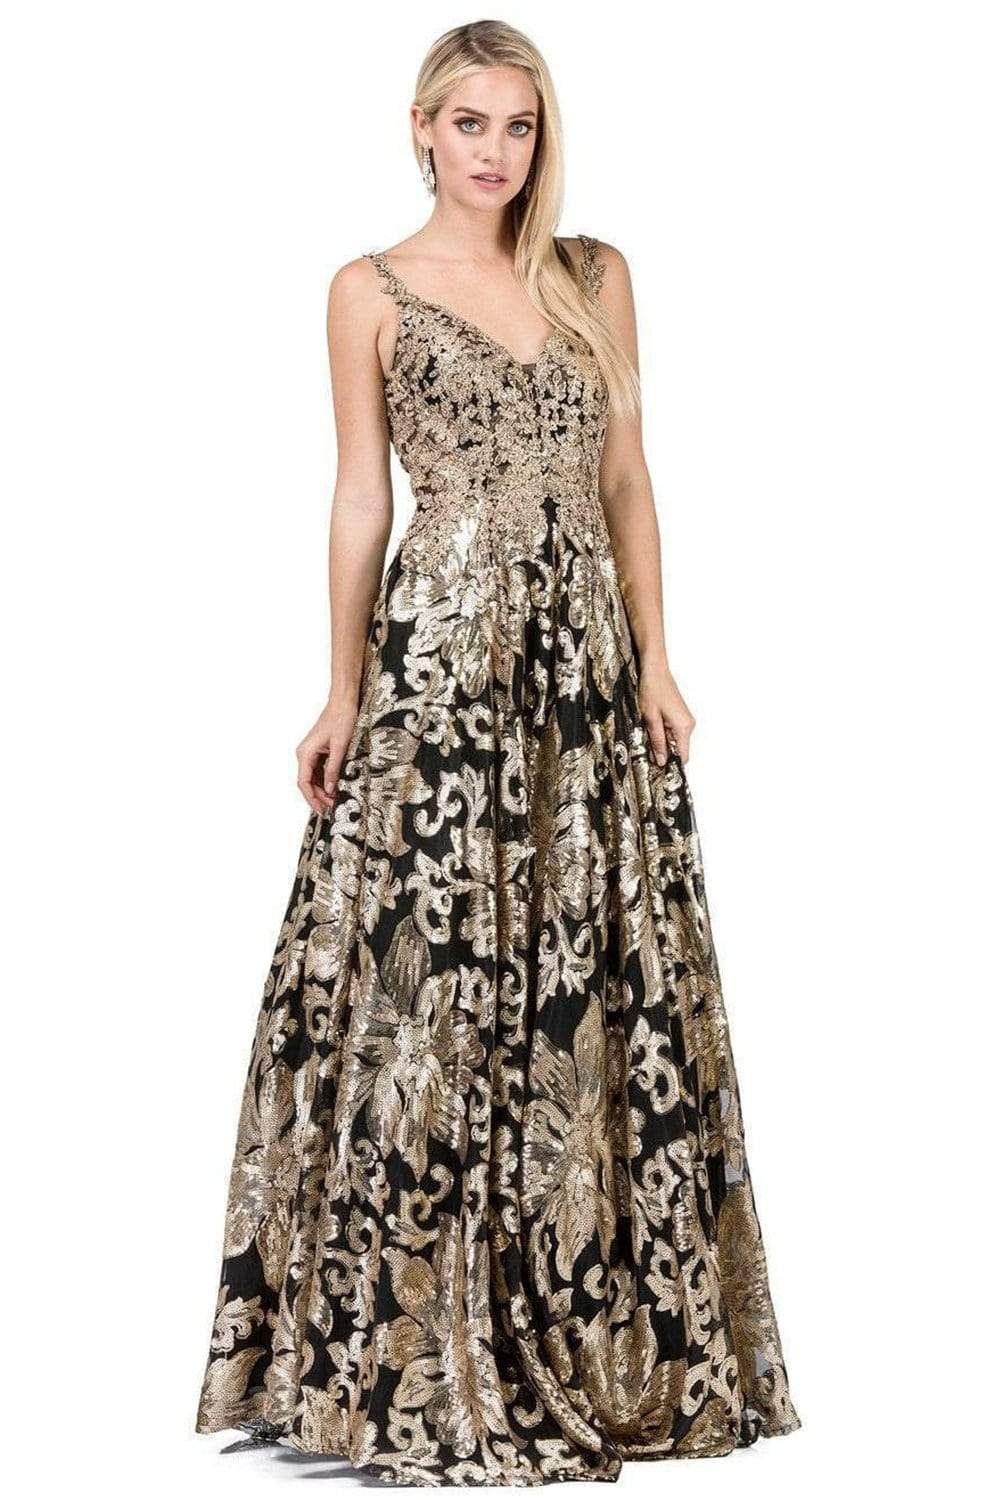 Dancing Queen - 2466 Appliqued Metallic Floral Prom Gown Special Occasion Dress XS / Black/Gold